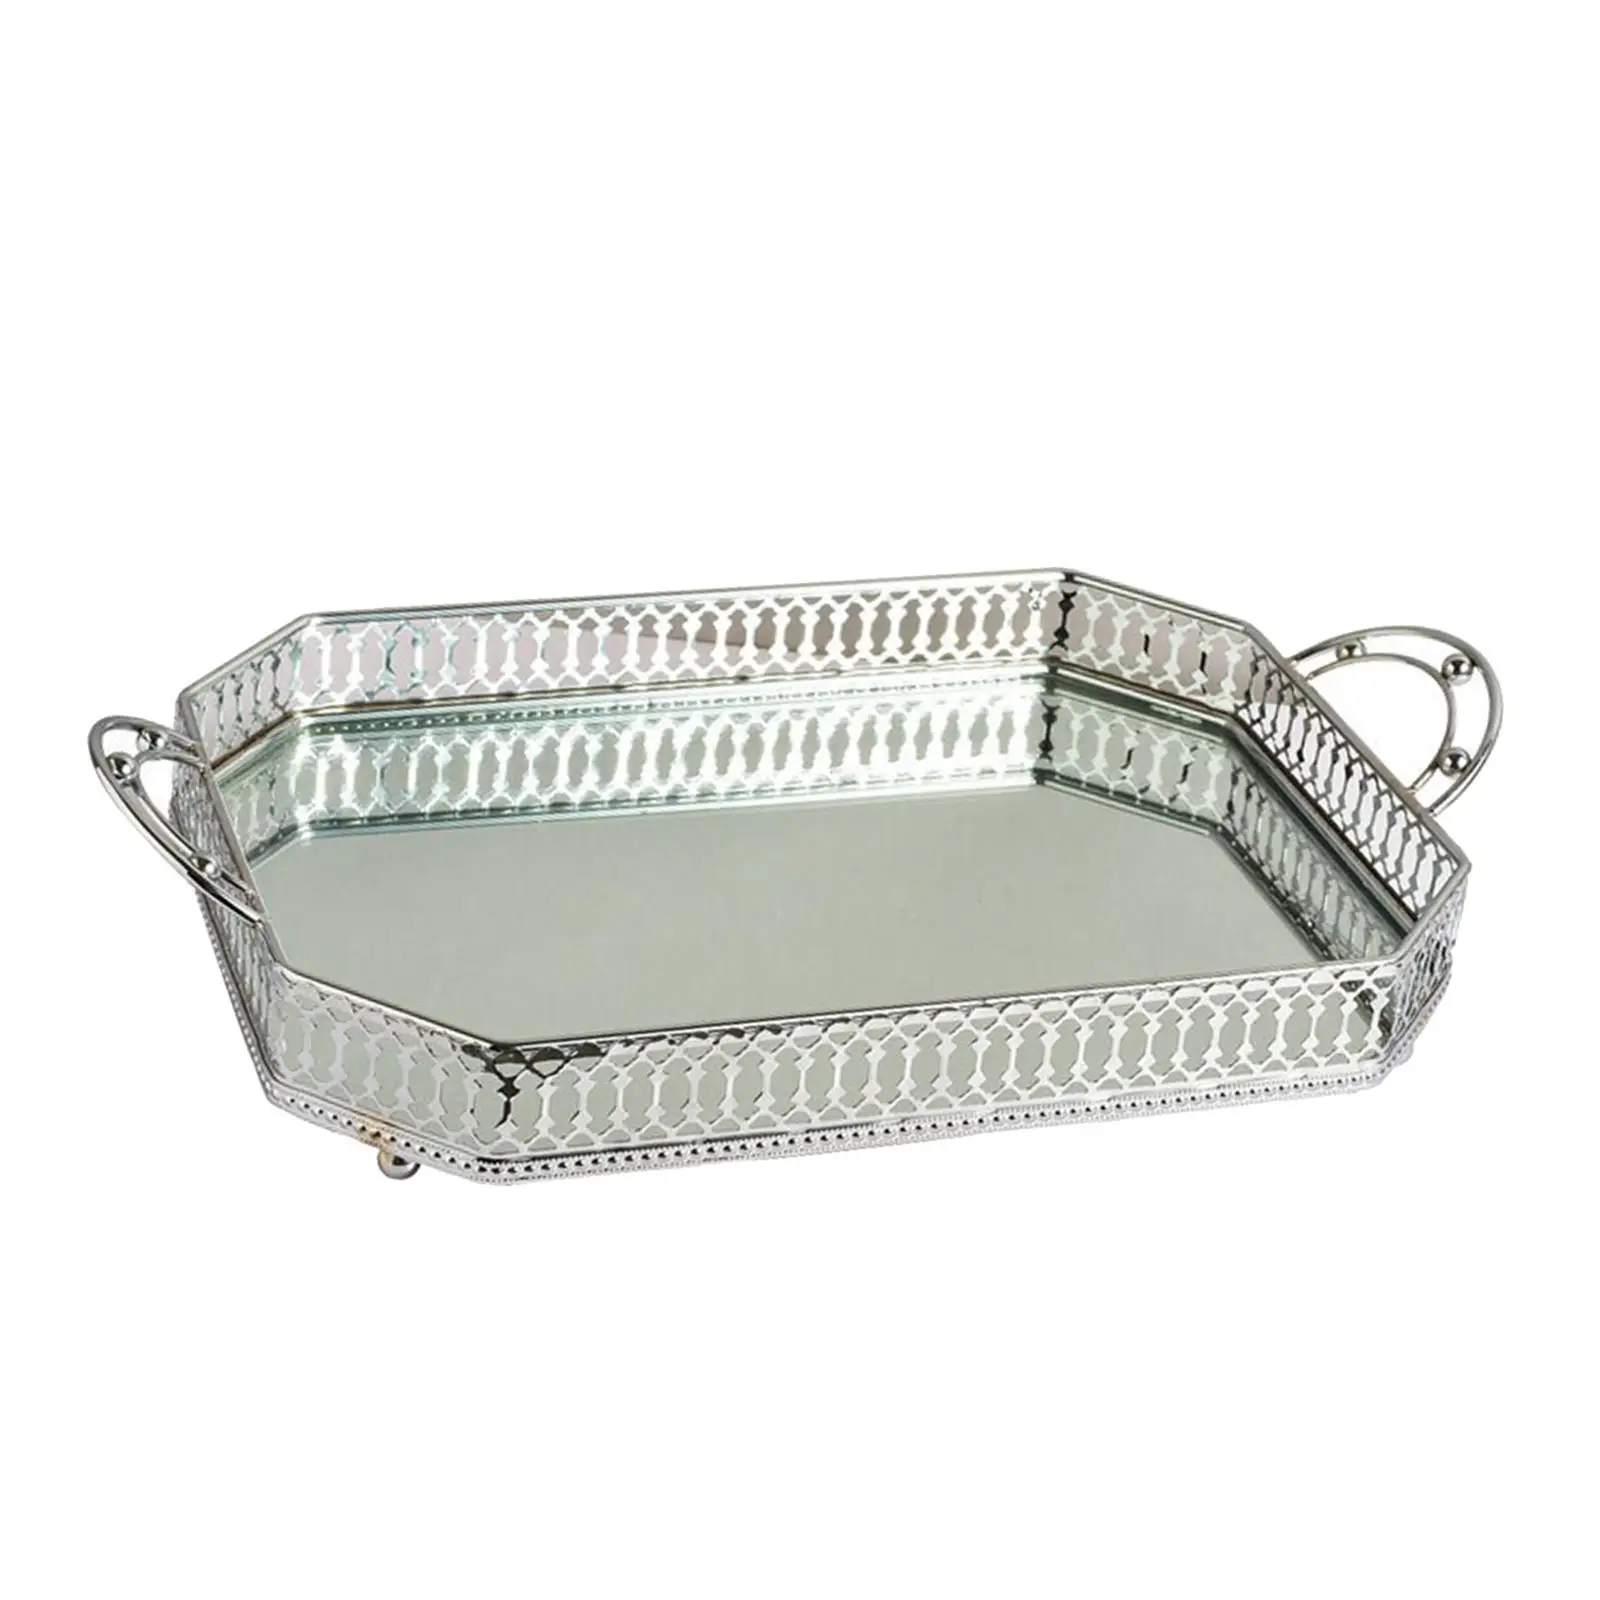 Metalmultipurpose Storage Tray Kitchen Organizer Plate Dessert Candy Dish Mirror Tray for Pantry Coffee Table Decoration